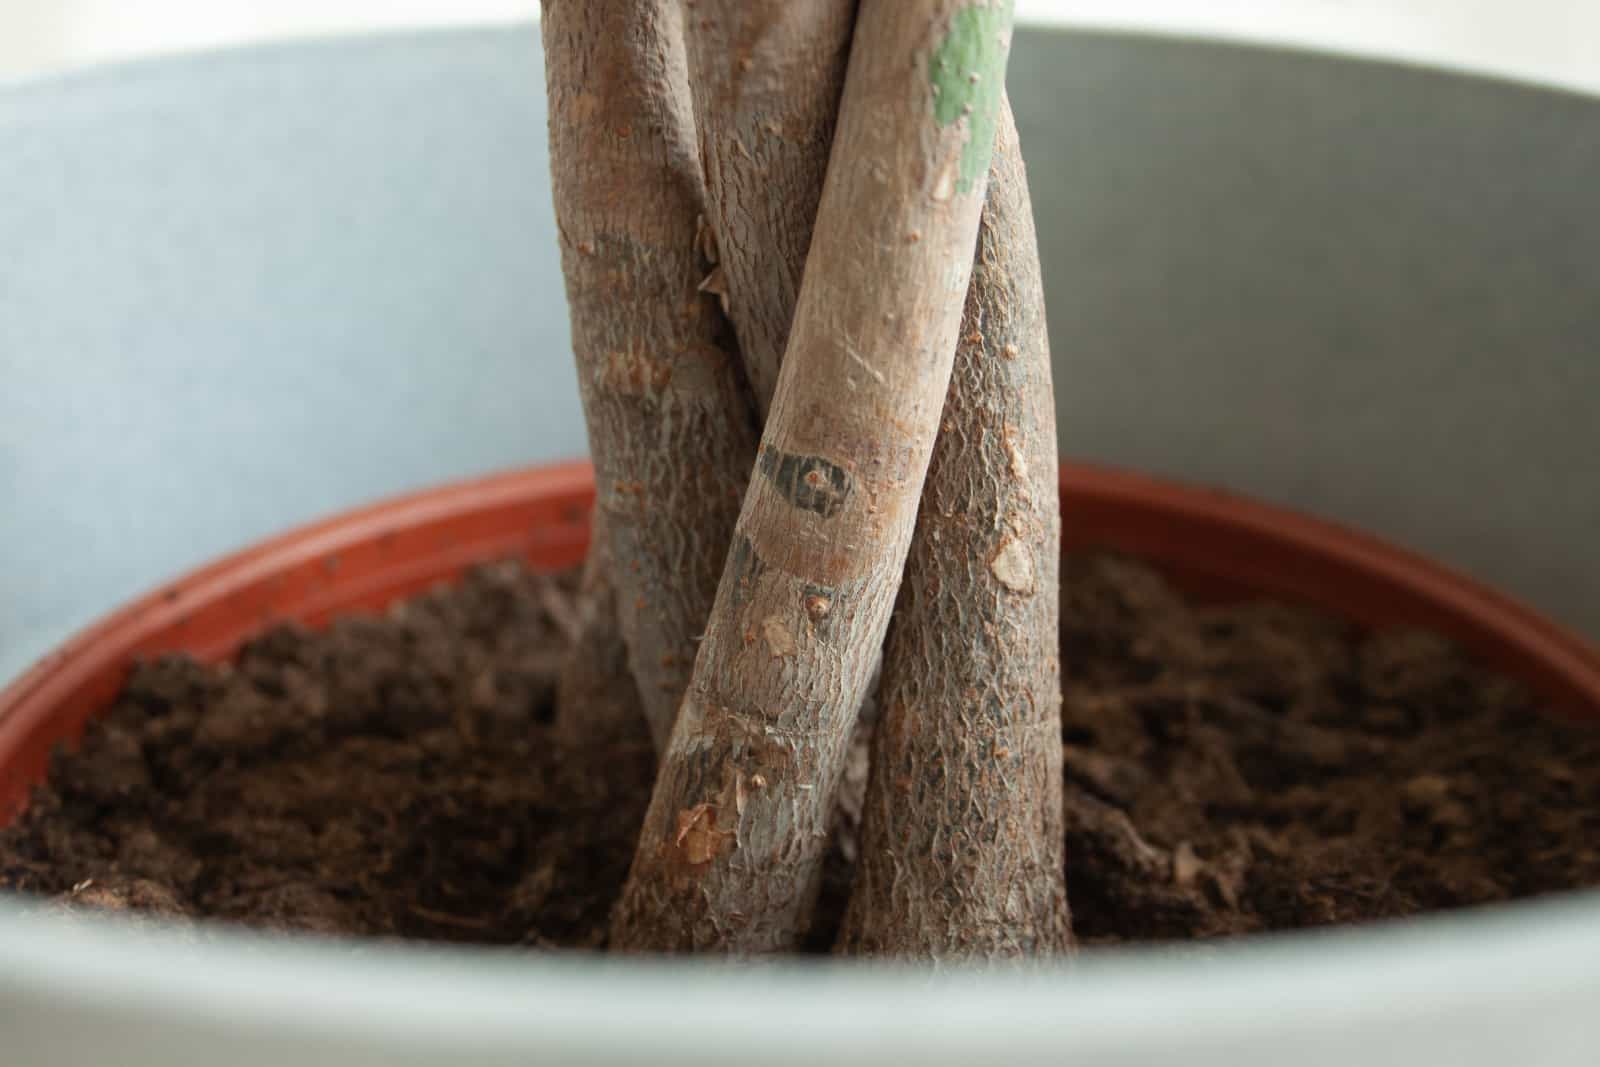 roots of an indoor Pachira Aquatica (money tree plant) in a red-brown pot